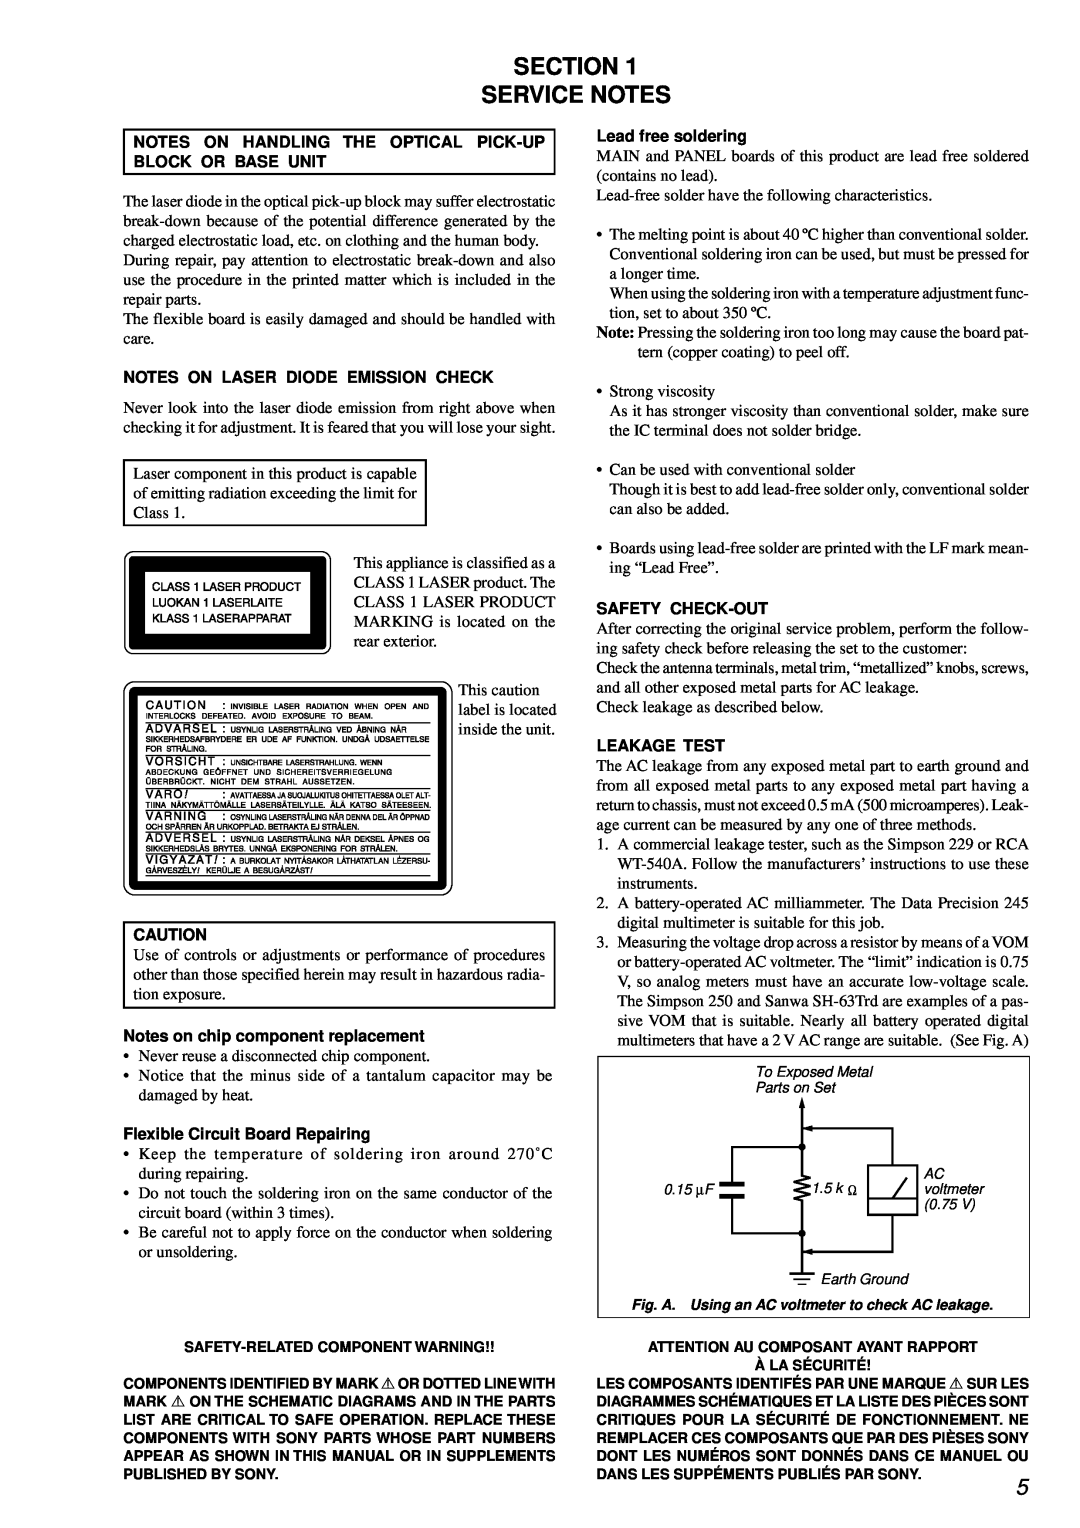 Sony MDS-PC3 Section Service Notes, Notes On Laser Diode Emission Check, Notes on chip component replacement, Leakage Test 